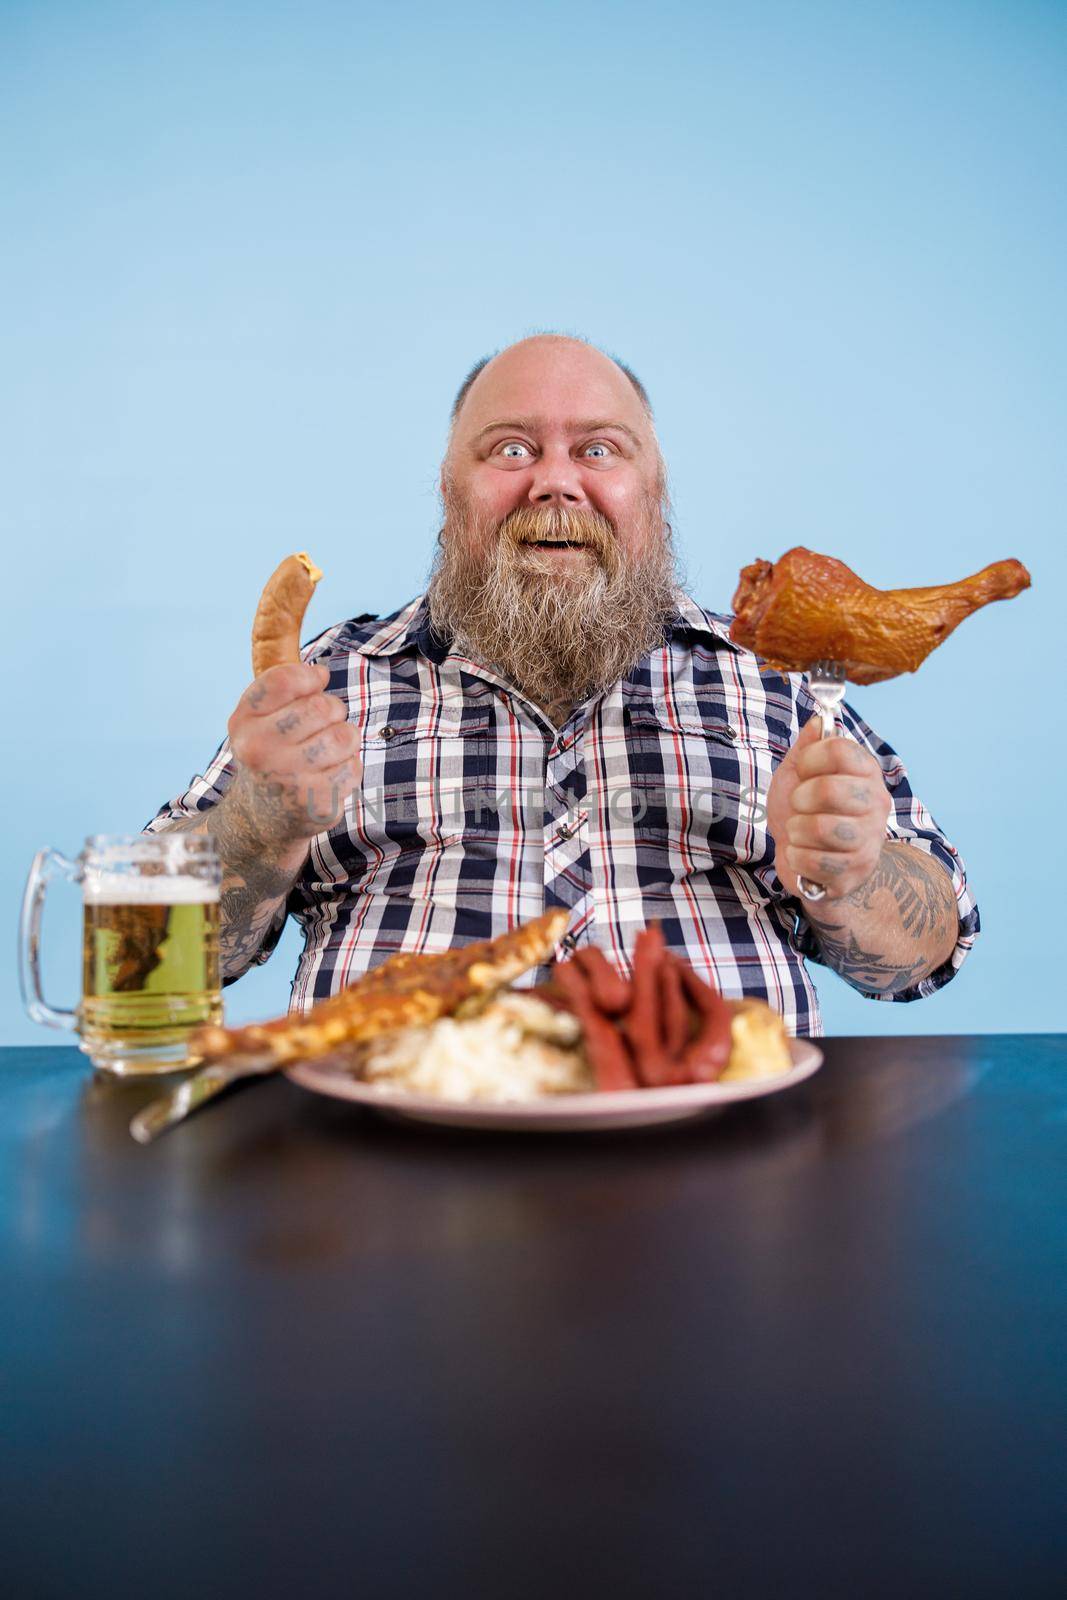 Cheerful person with overweight sits at table with fat food and beer by Yaroslav_astakhov